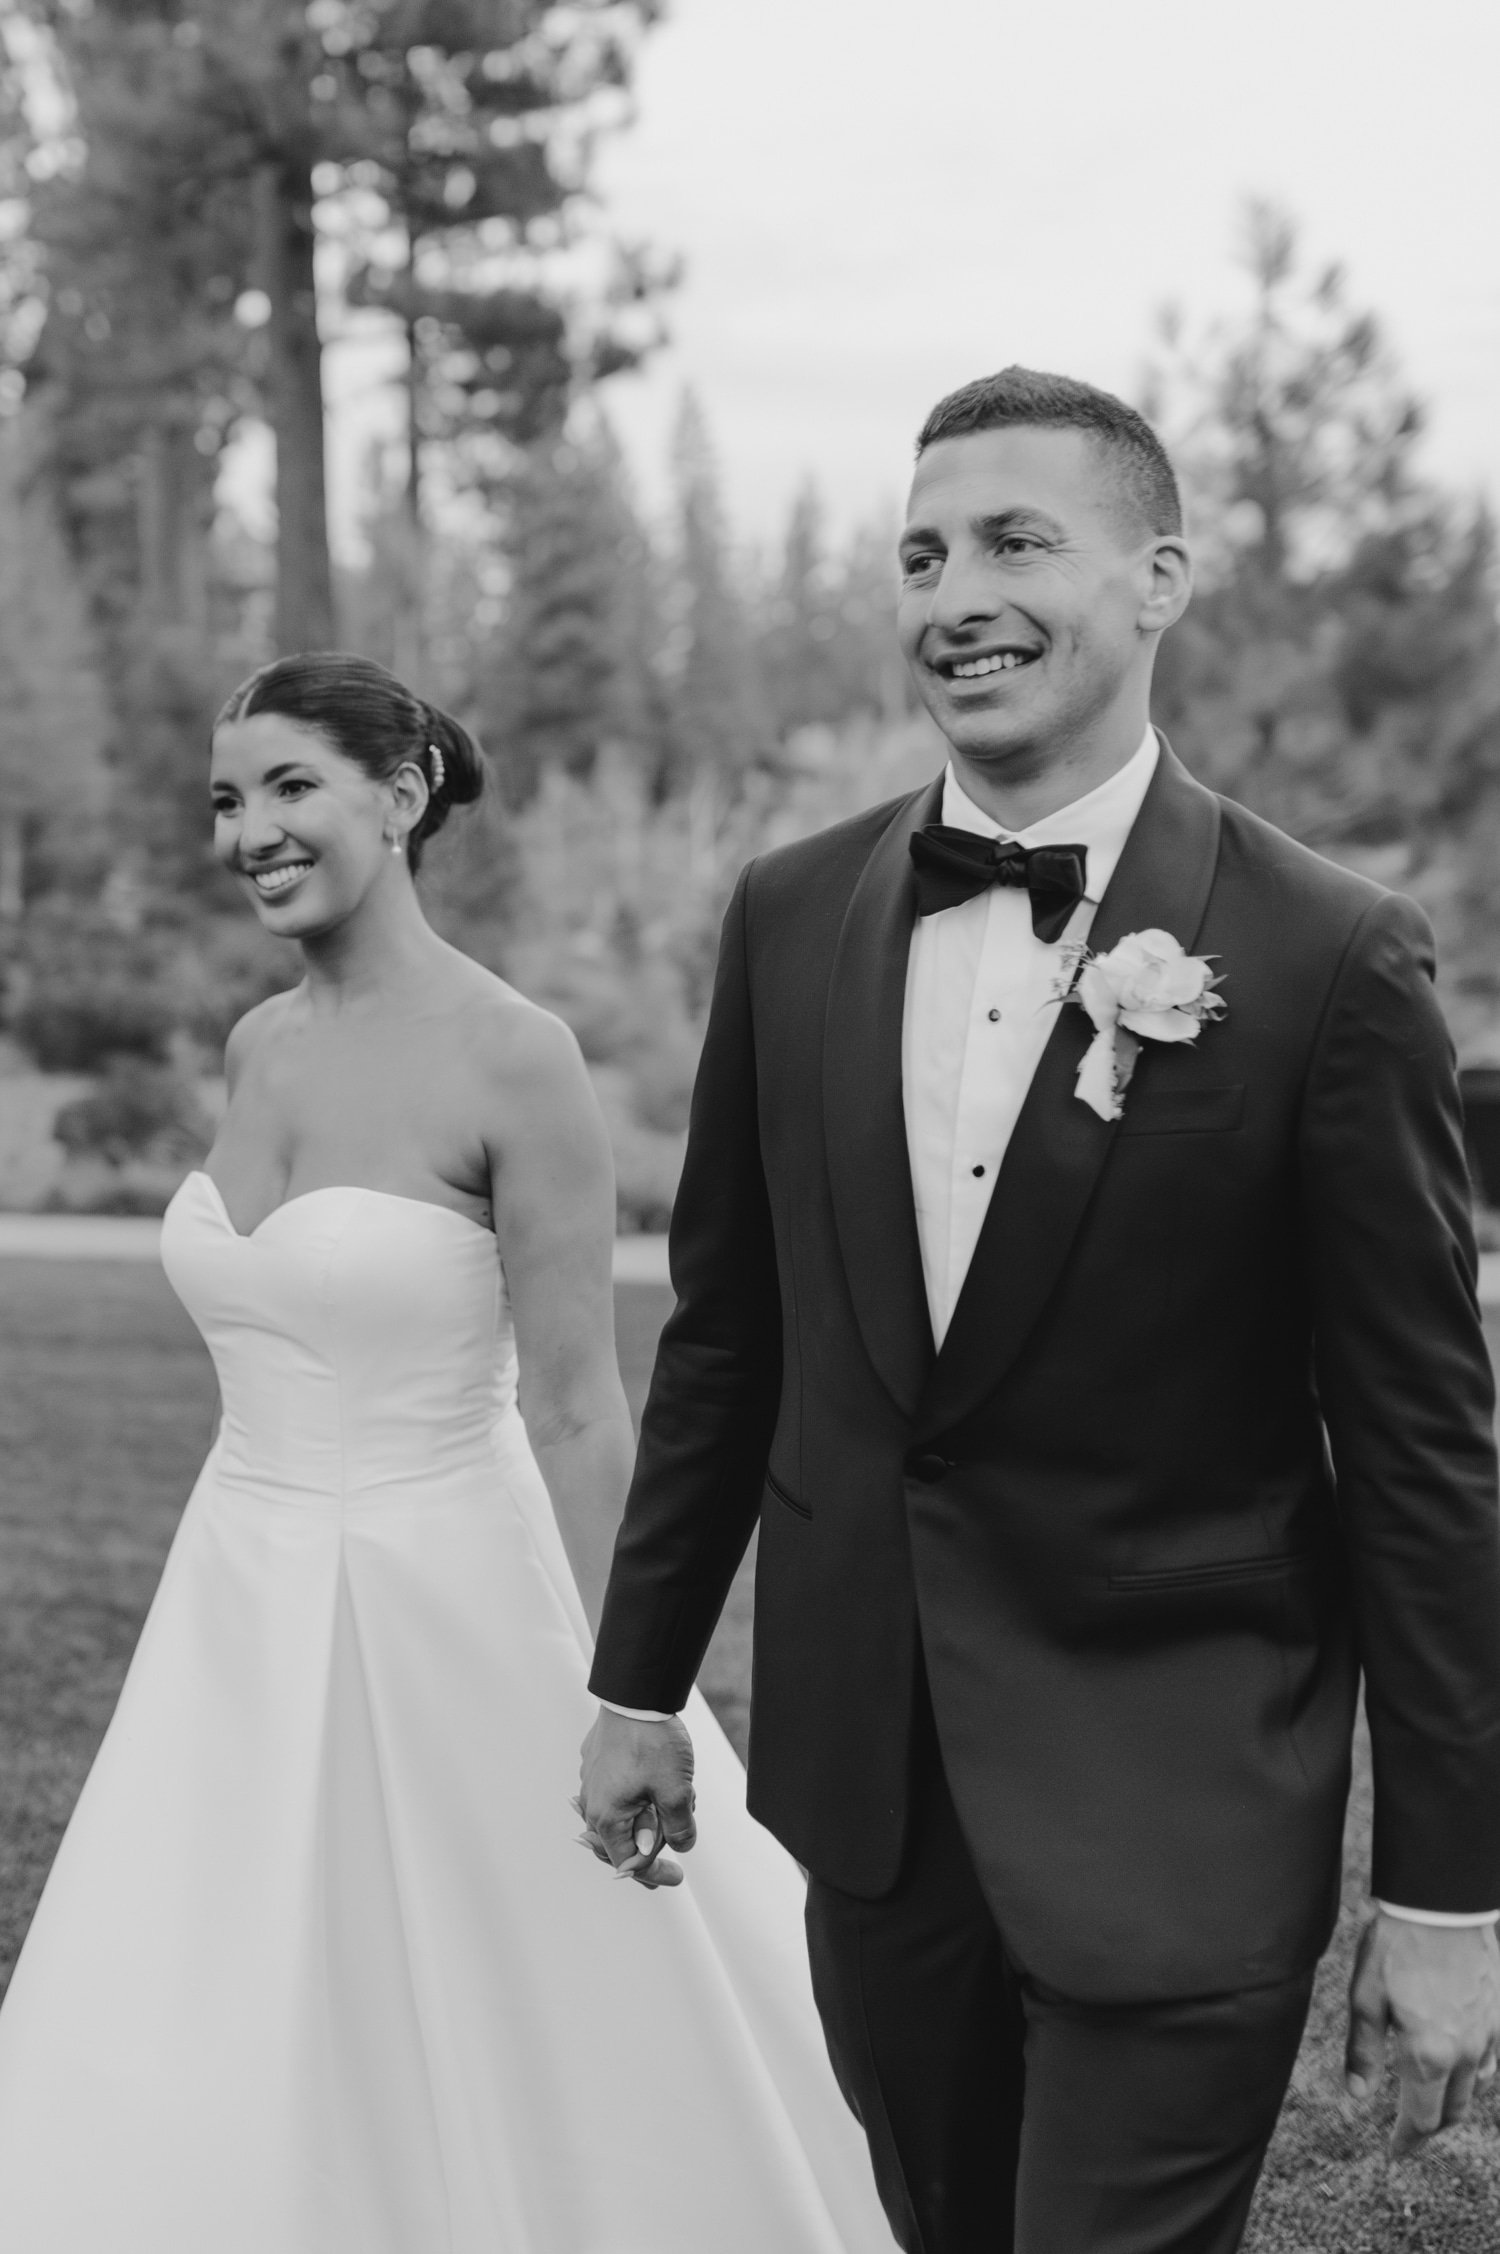 Martis Camp Wedding, photo of the newlywed couple holding hands while walking